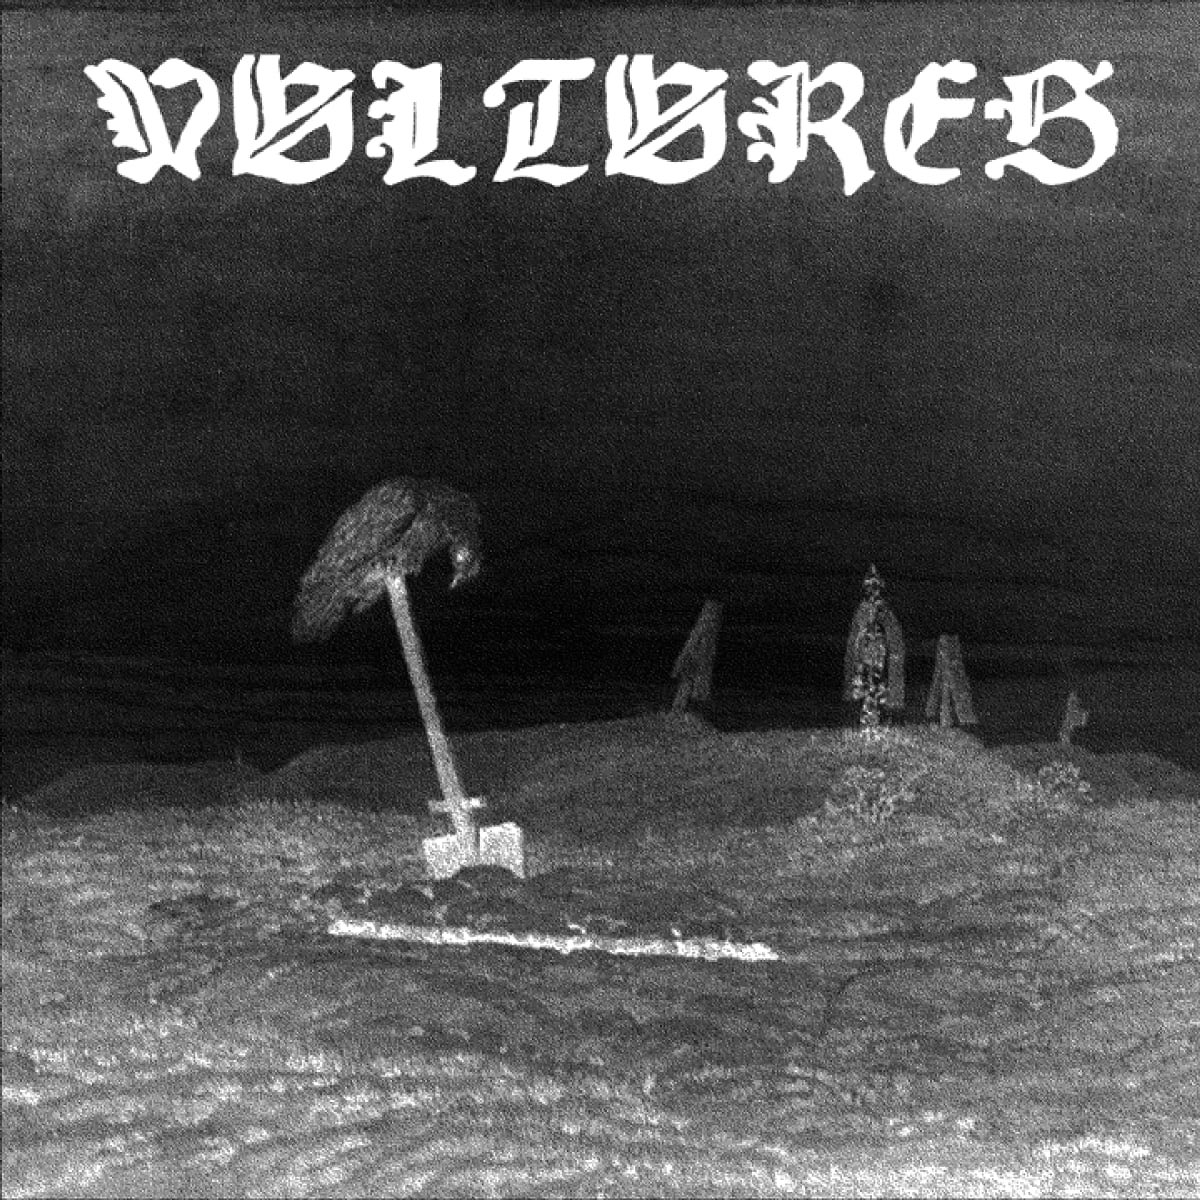 #Vultures This Friday